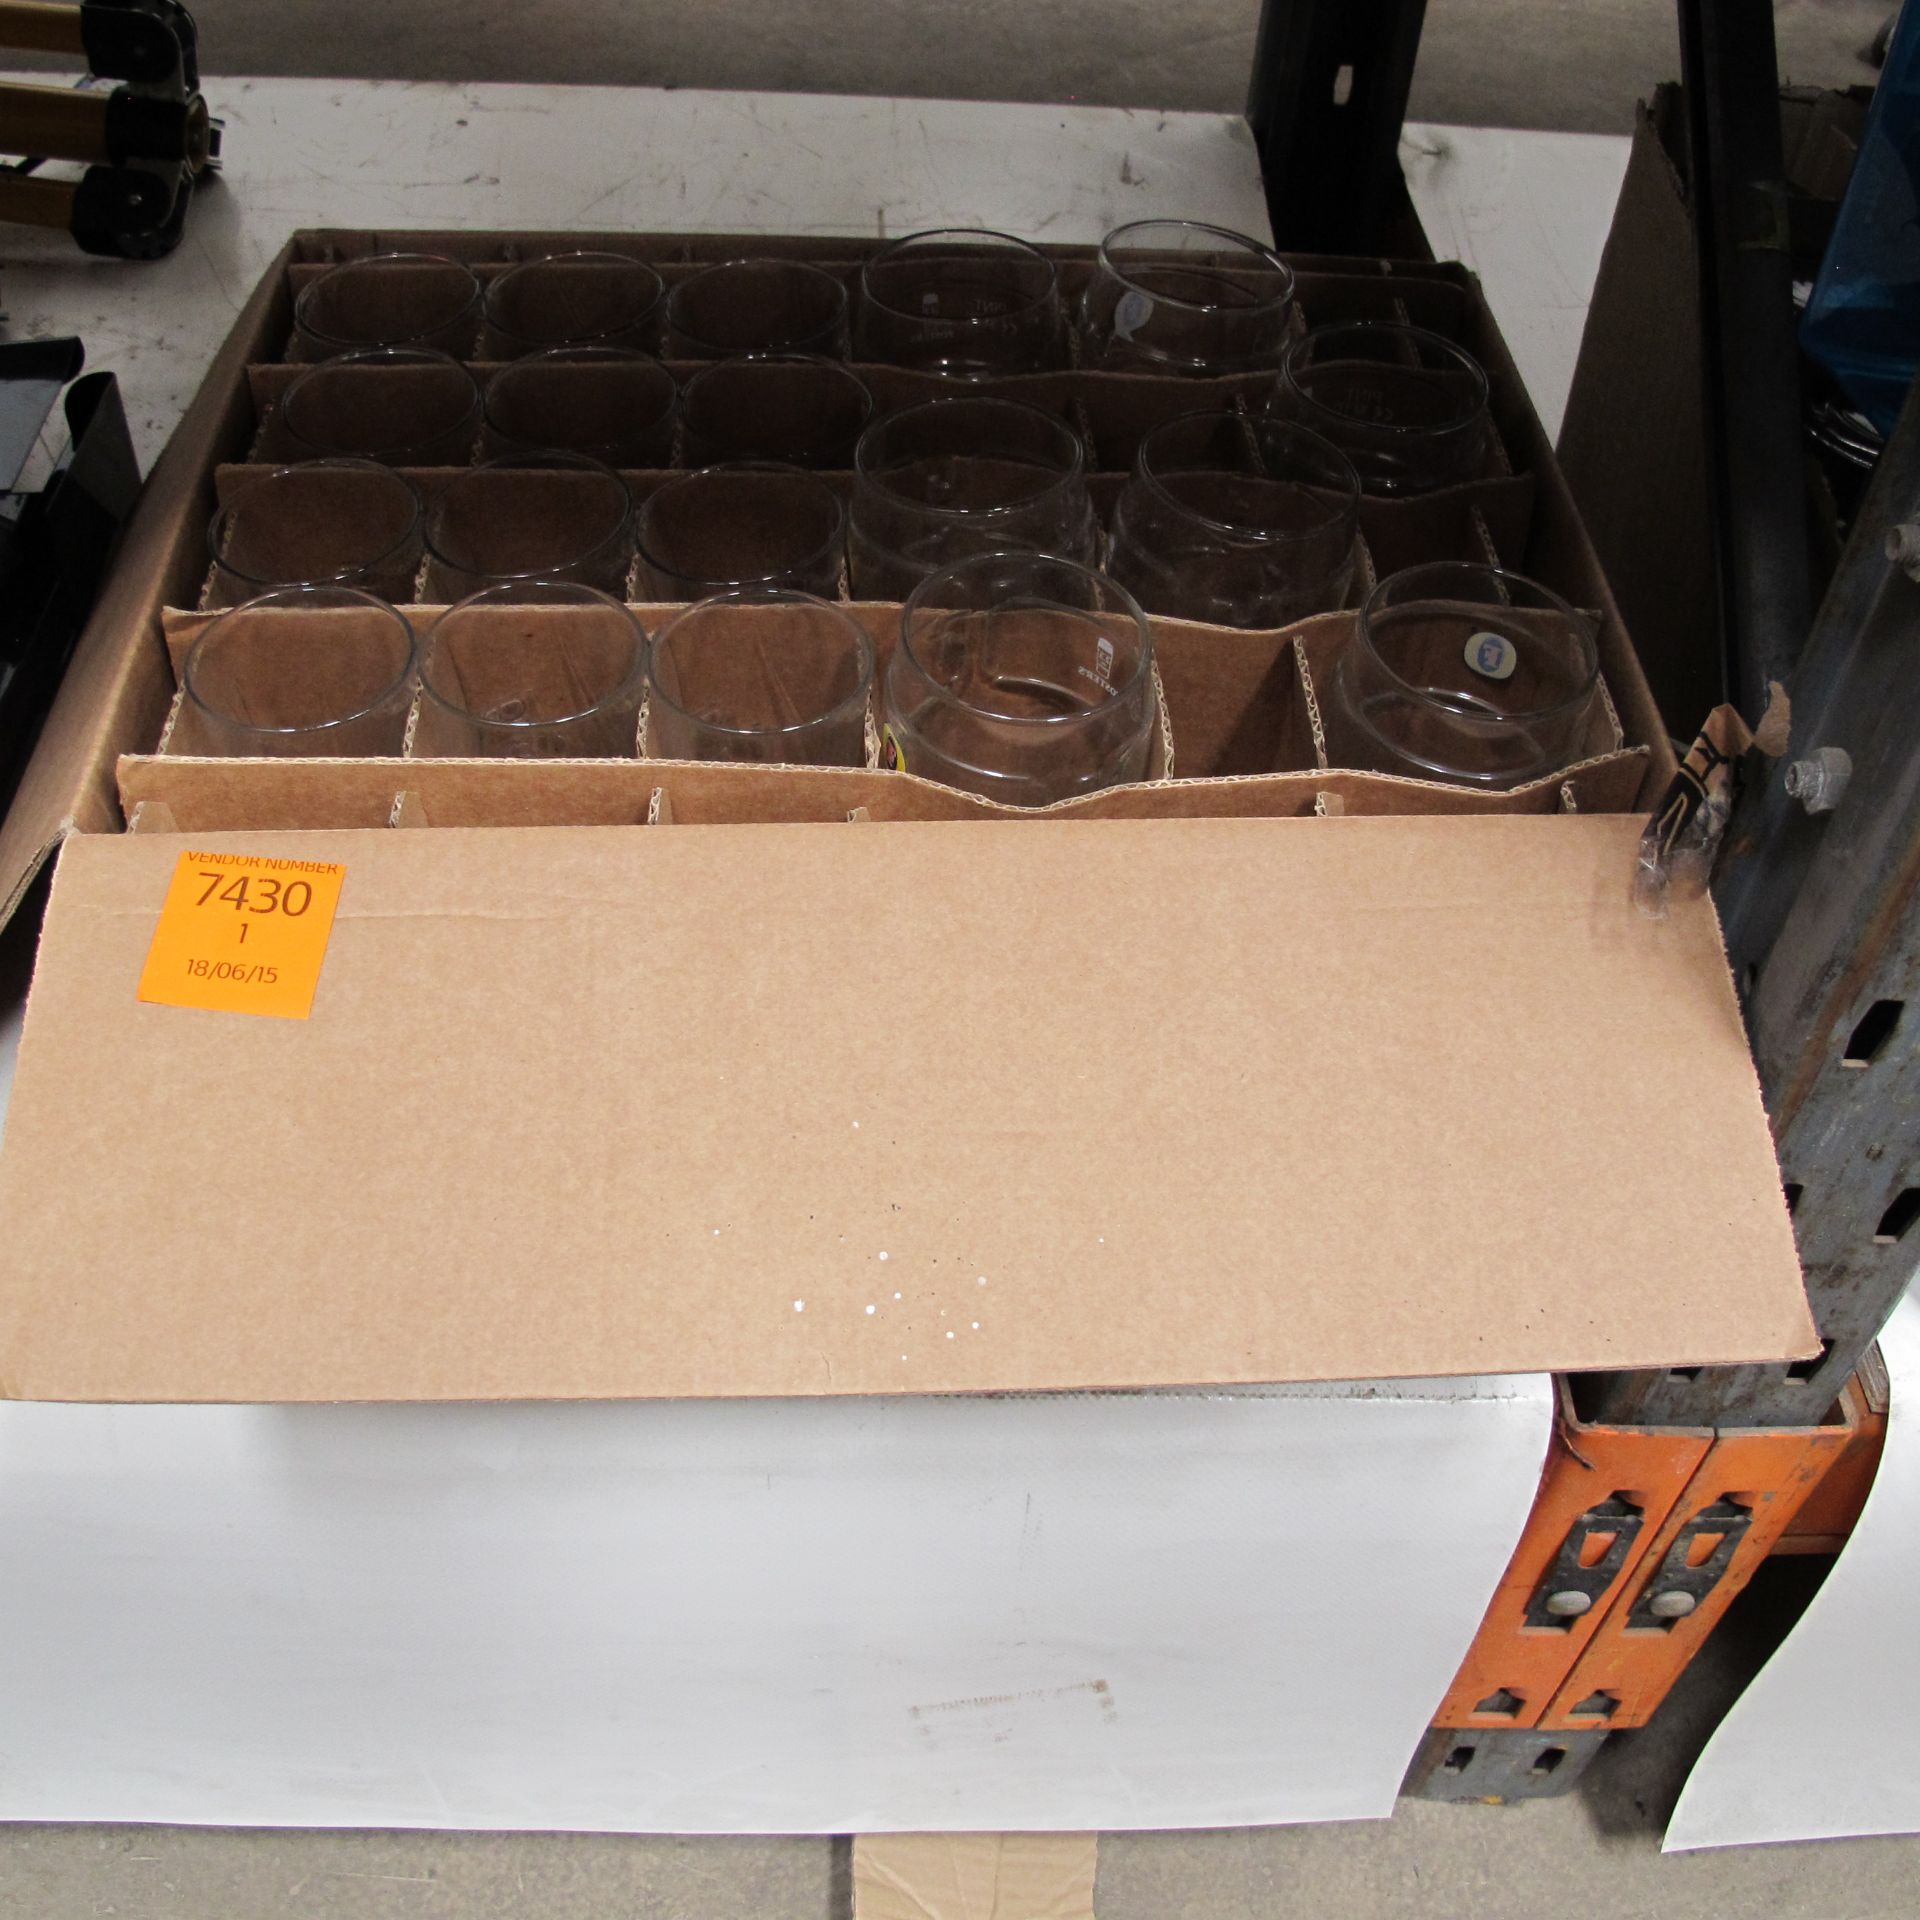 6 x Boxes of Pint and ½ pint glasses c/w folding metal patio umbrella stand - Image 5 of 6